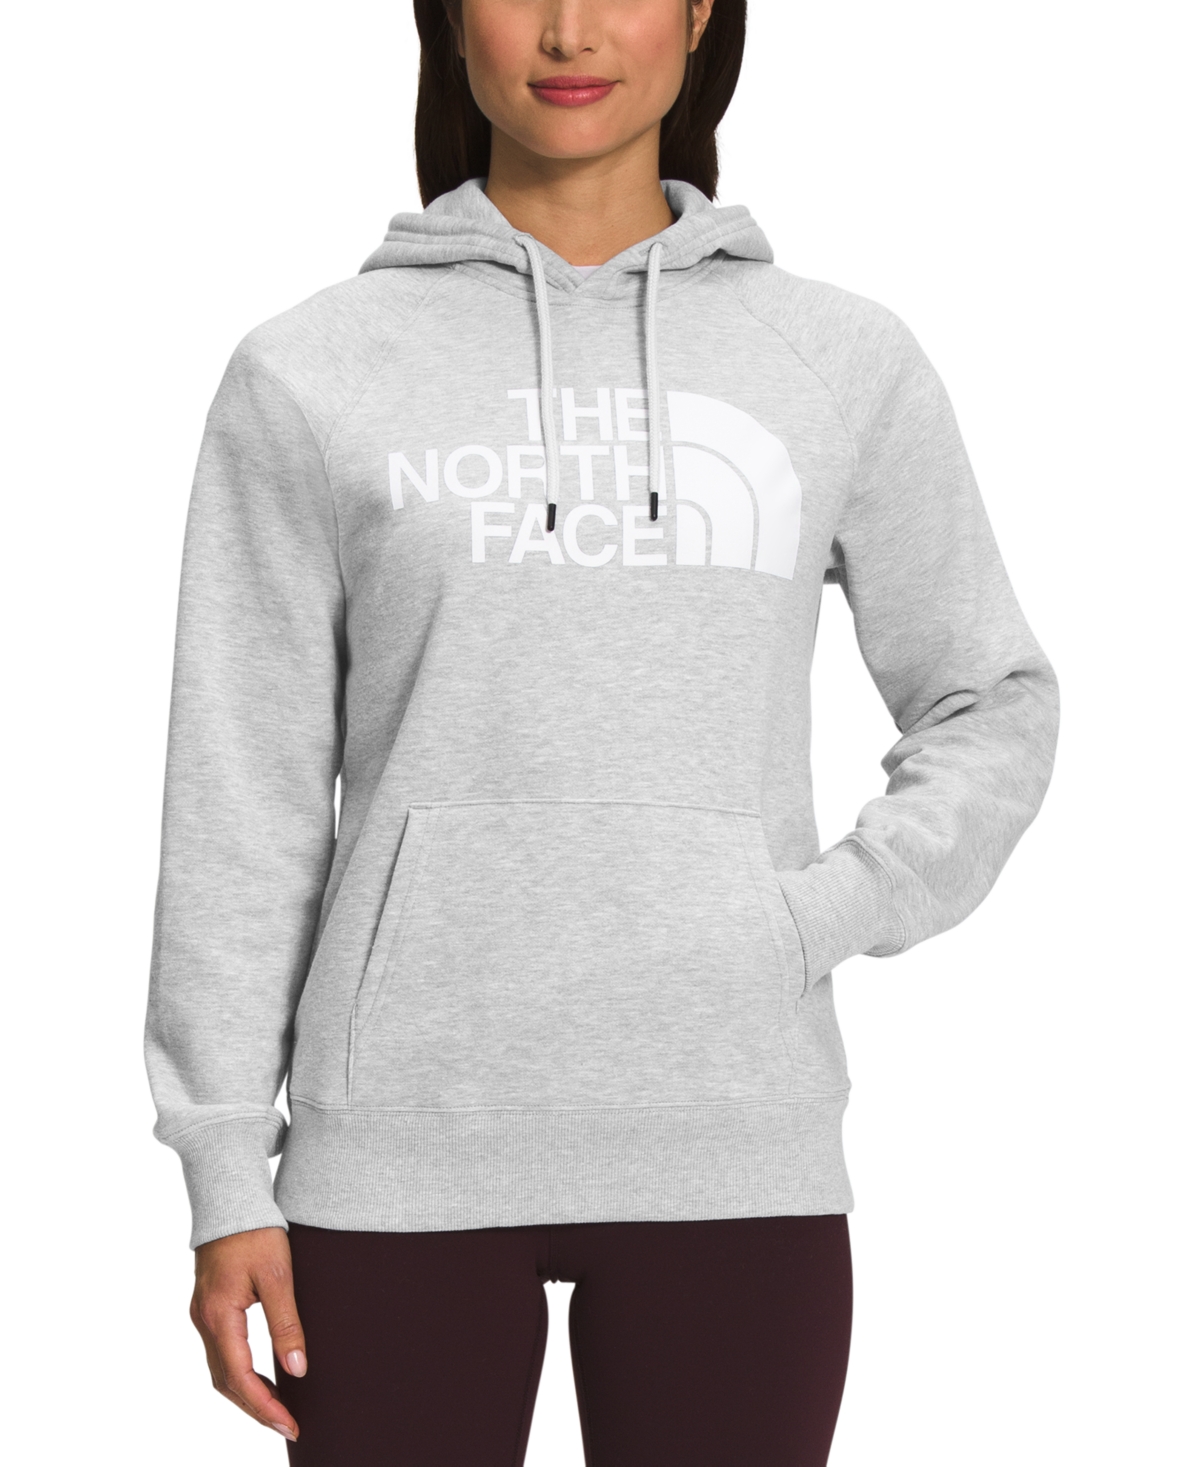 The North Face Women's Half Dome Fleece Pullover Hoodie In Tnf Light Grey Heather,tnf White